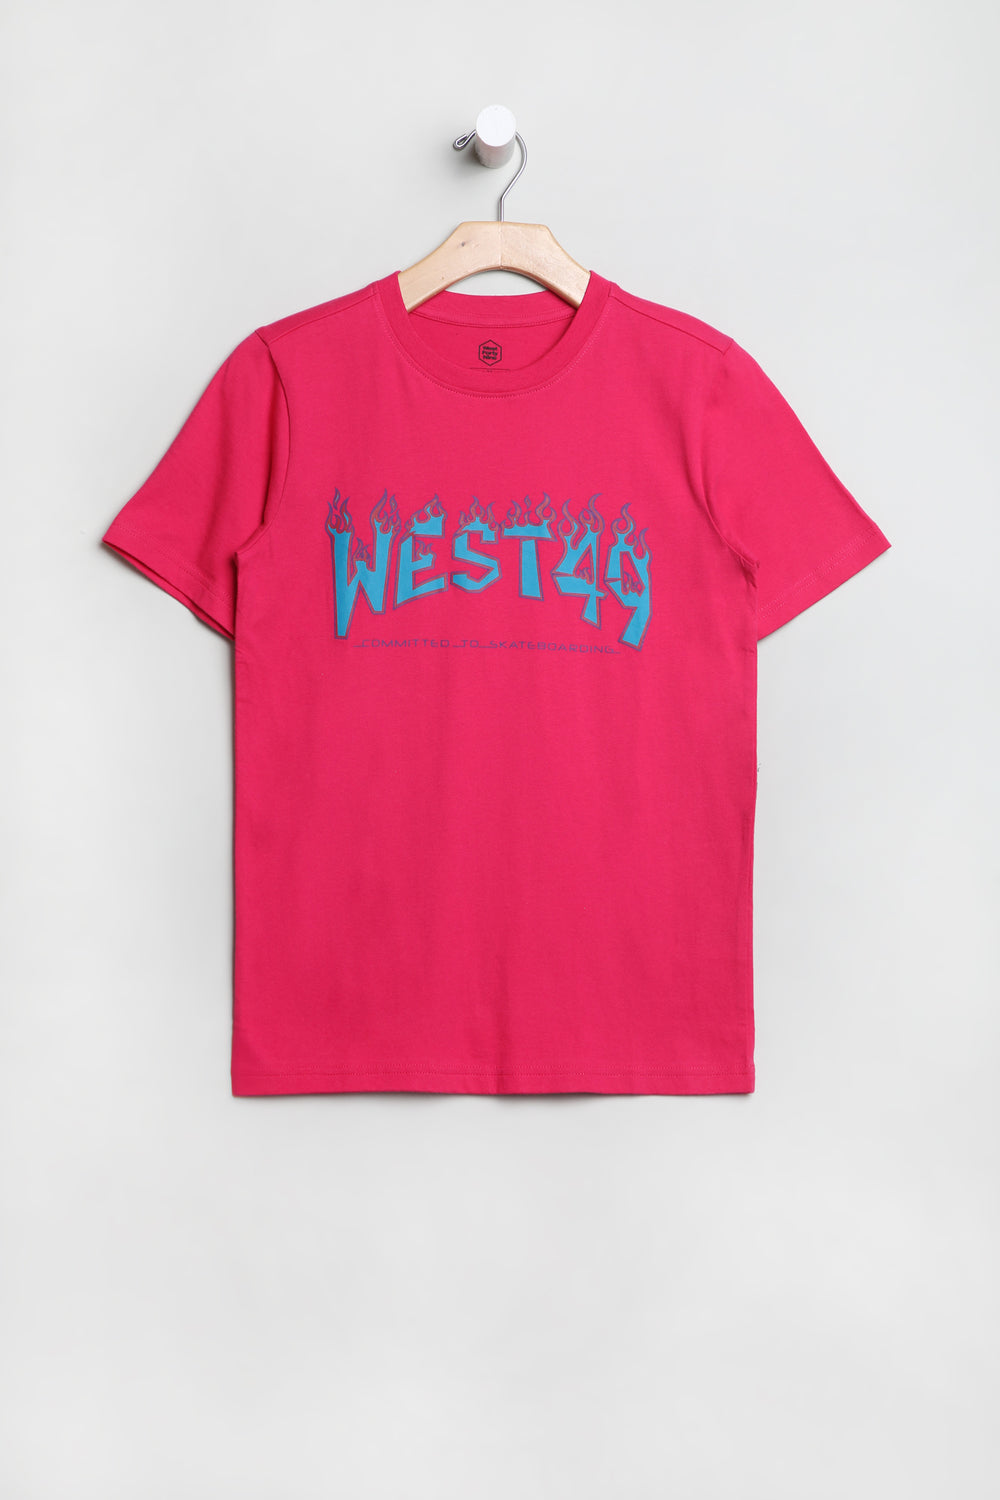 West49 Youth Flame Logo T-Shirt Magenta